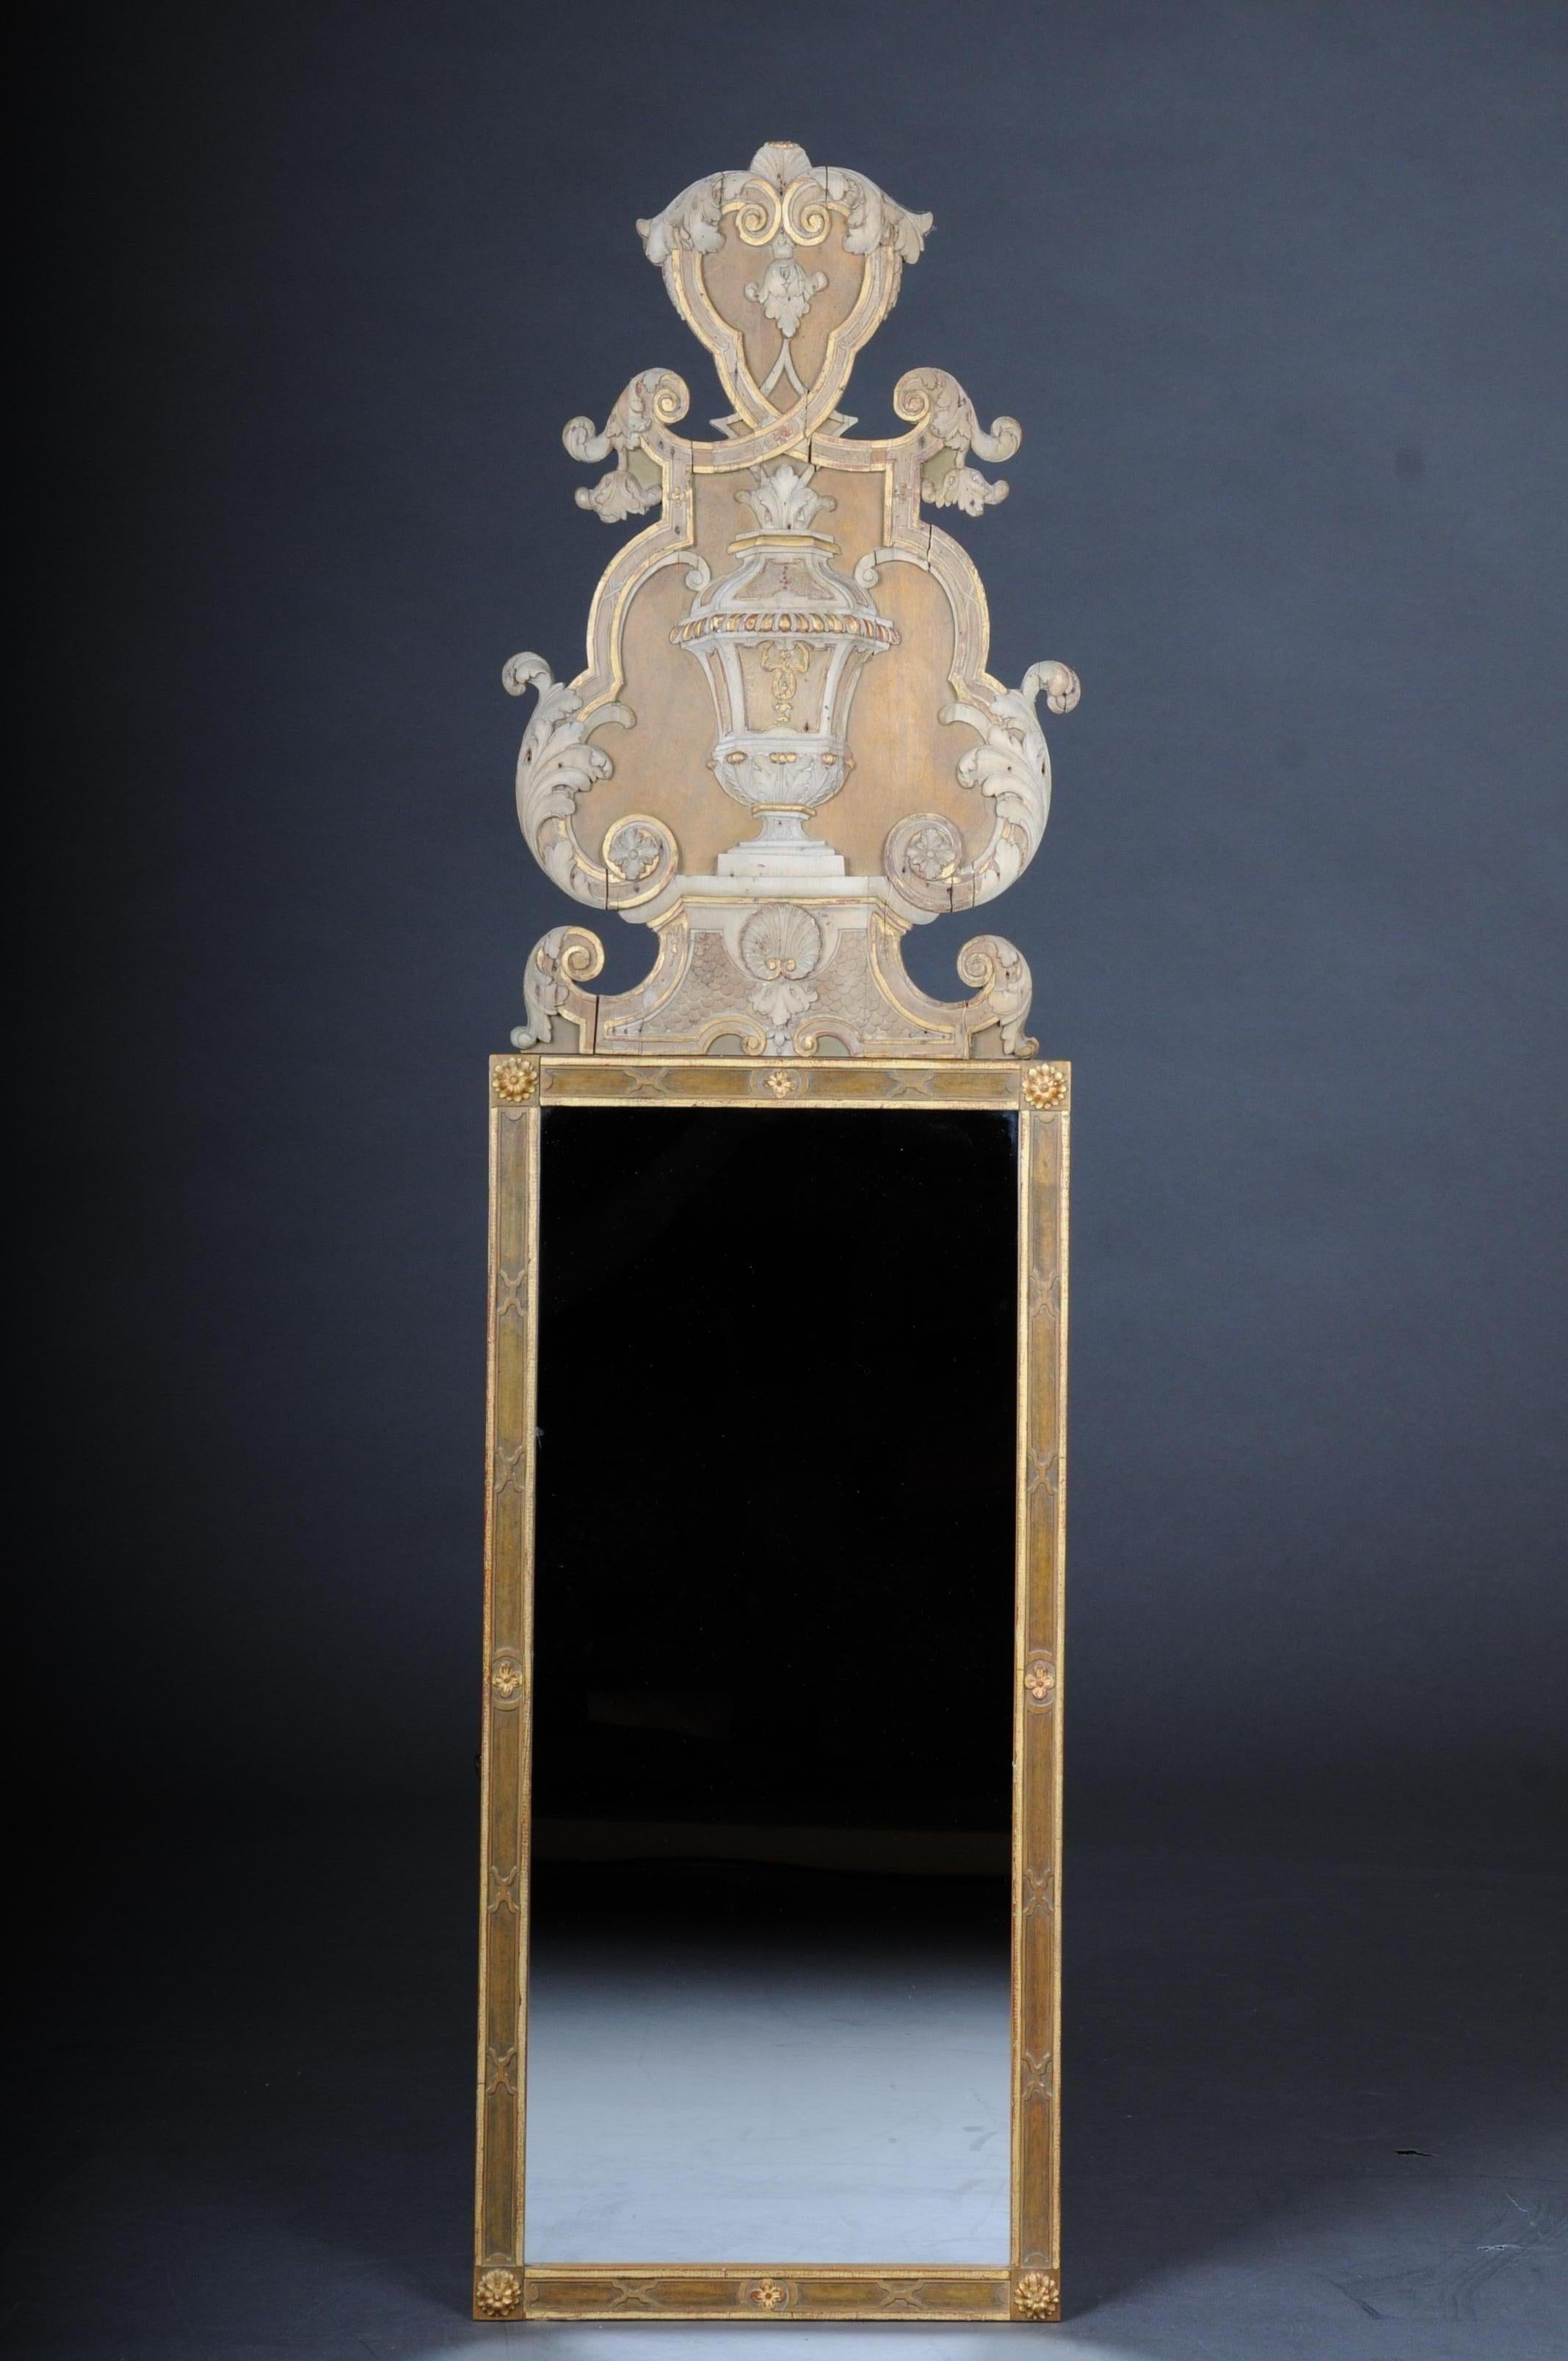 Classicism wall mirror, colored 19th century

Carved solid wood. Classicism mirror, gold-plated and colored. 
Rich and high ornate crown. Extremely decorative and splendid.

(M-53).